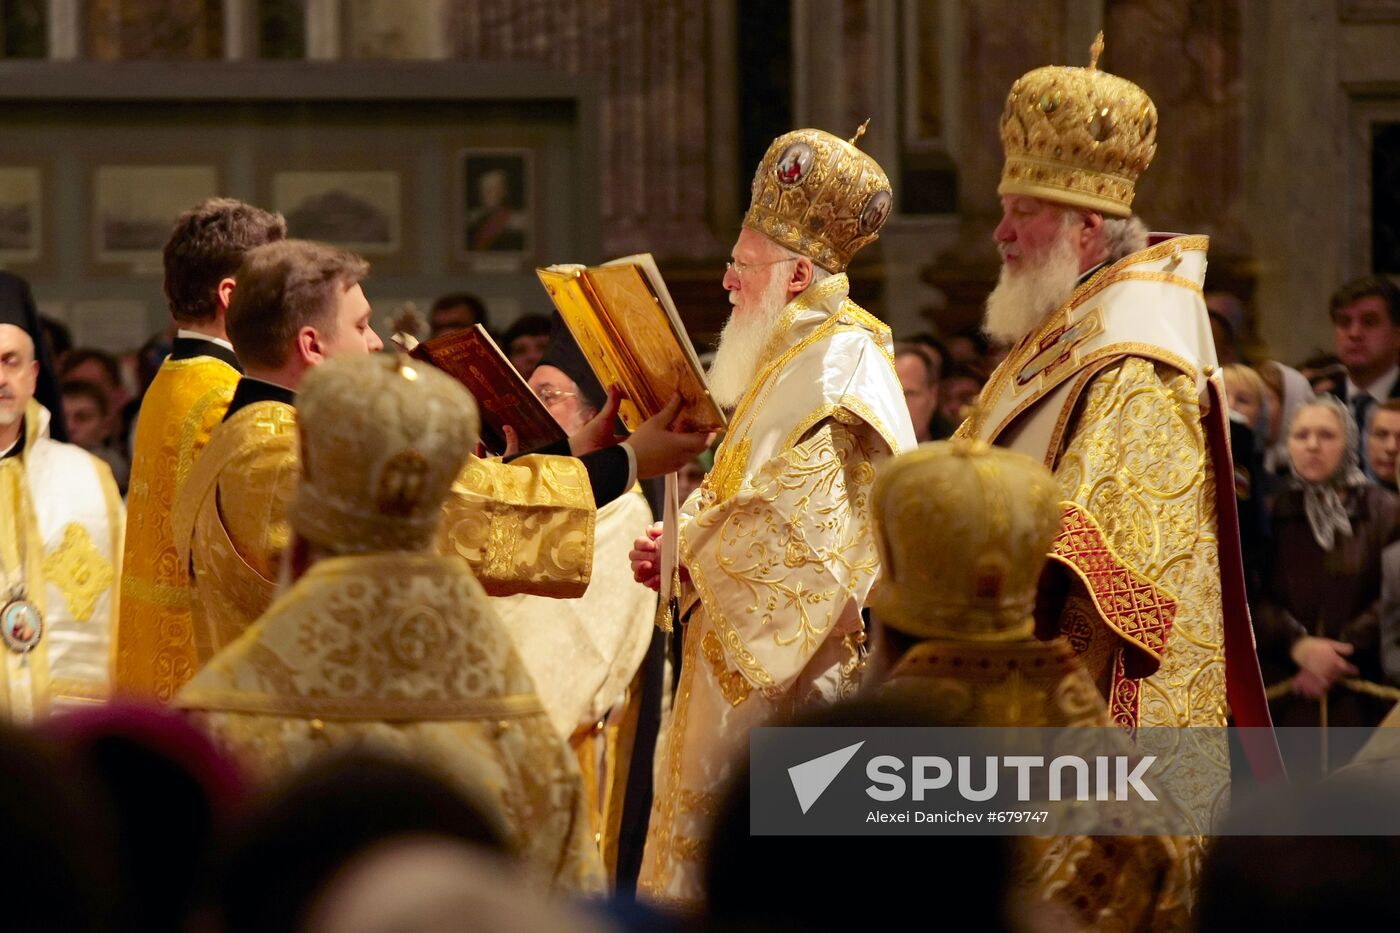 Patriarch Bartholomew and Patriarch Kirill hold joint service